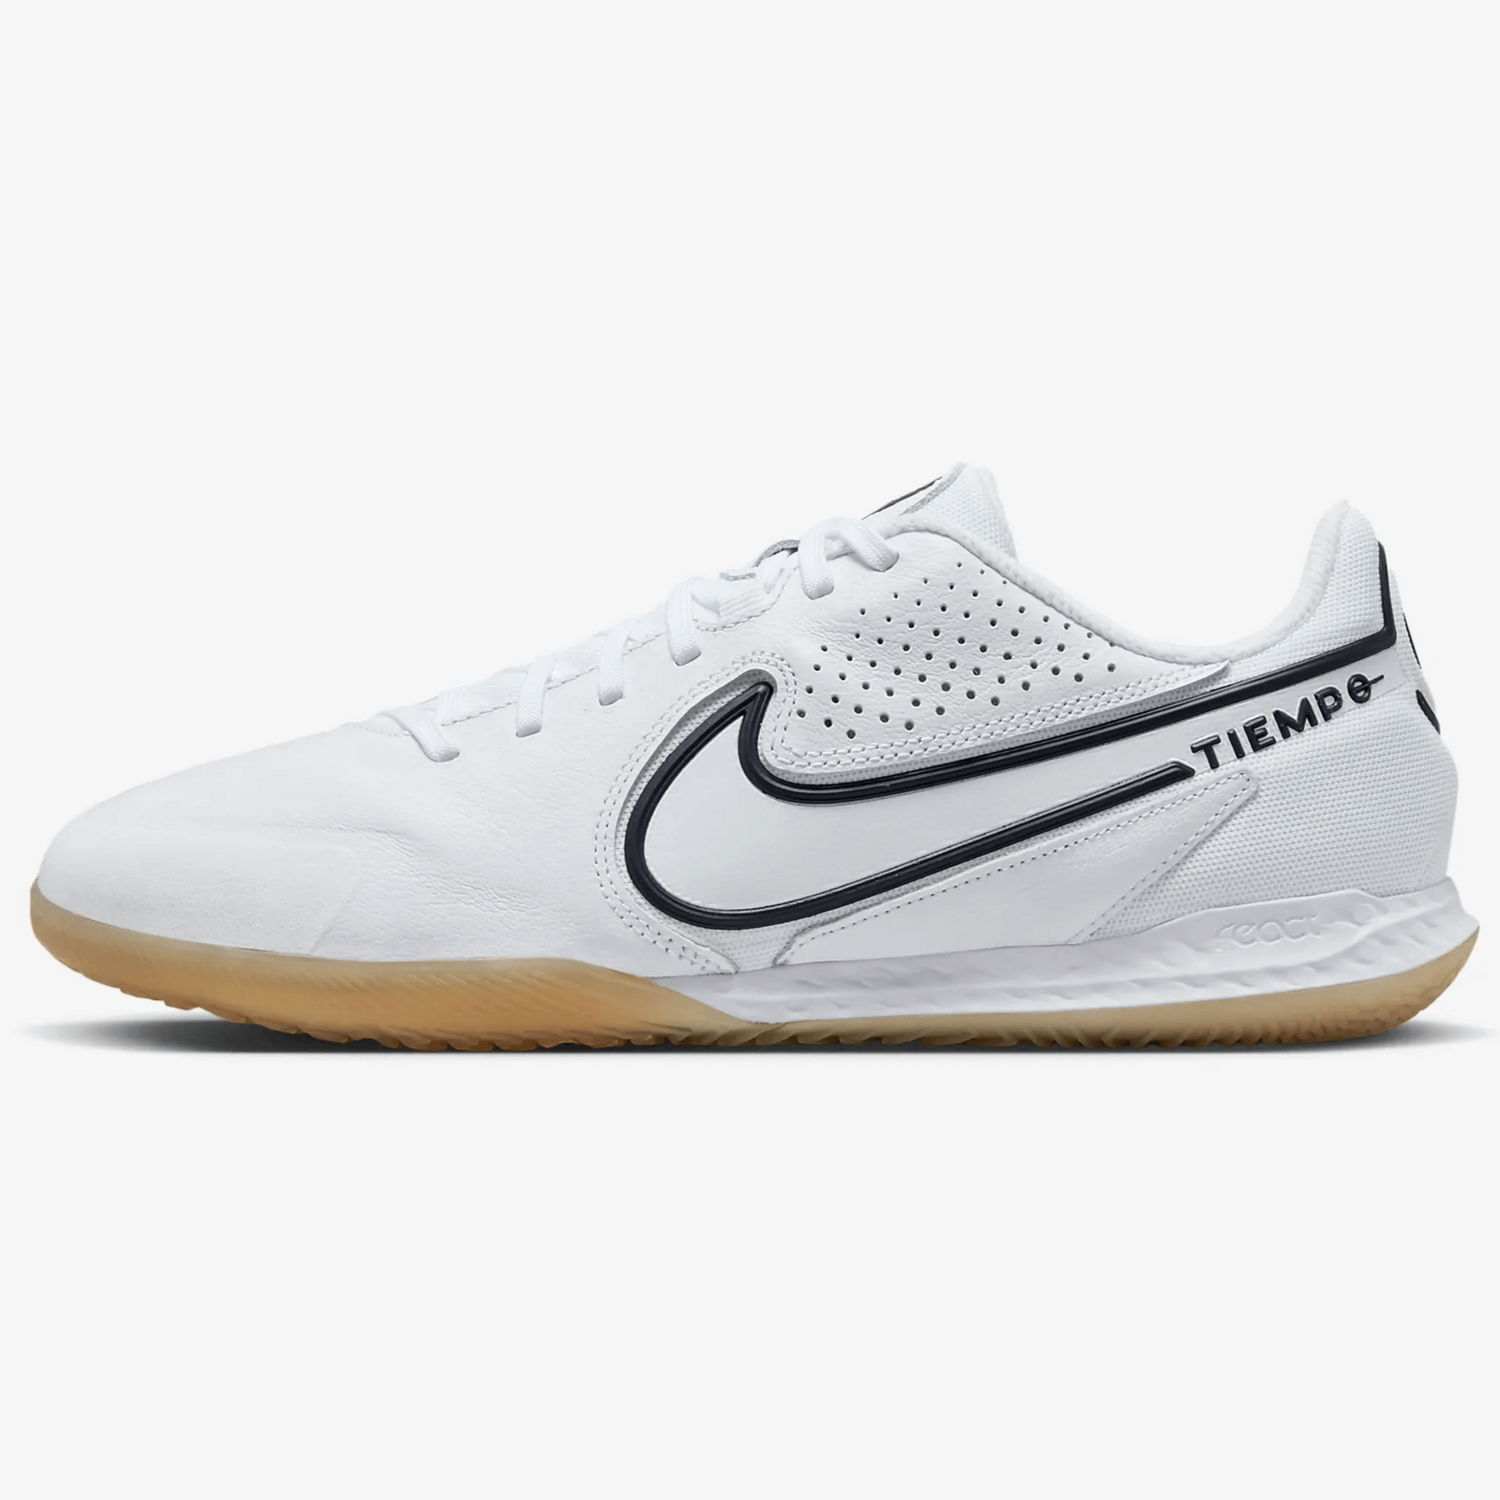 Nike React Legend 9 Pro Indoor - Small Sided Pack (FA23) (Side 1)